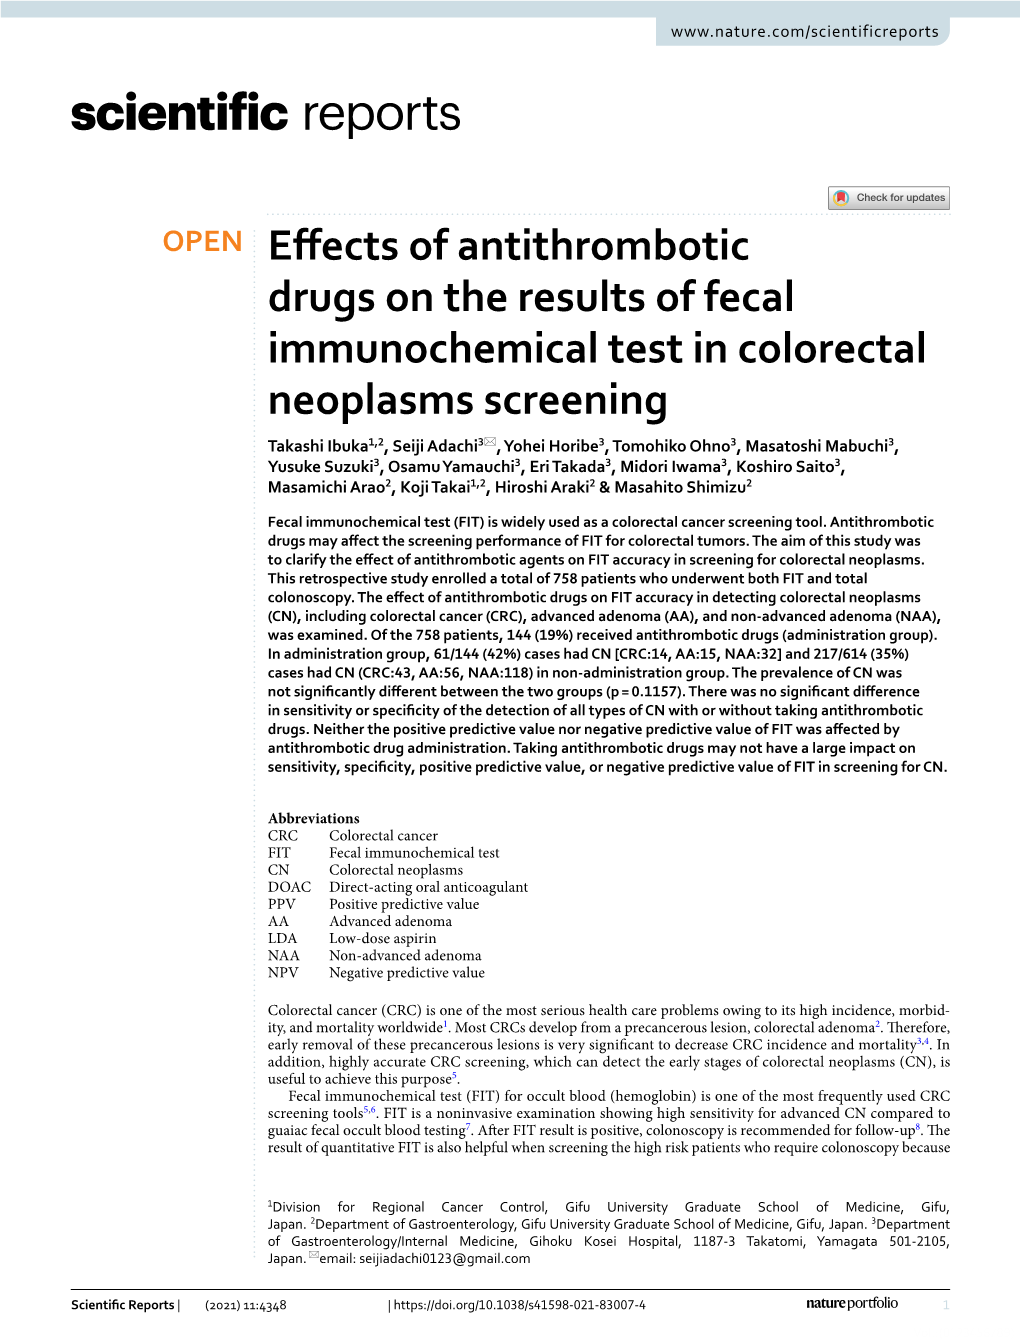 Effects of Antithrombotic Drugs on the Results of Fecal Immunochemical